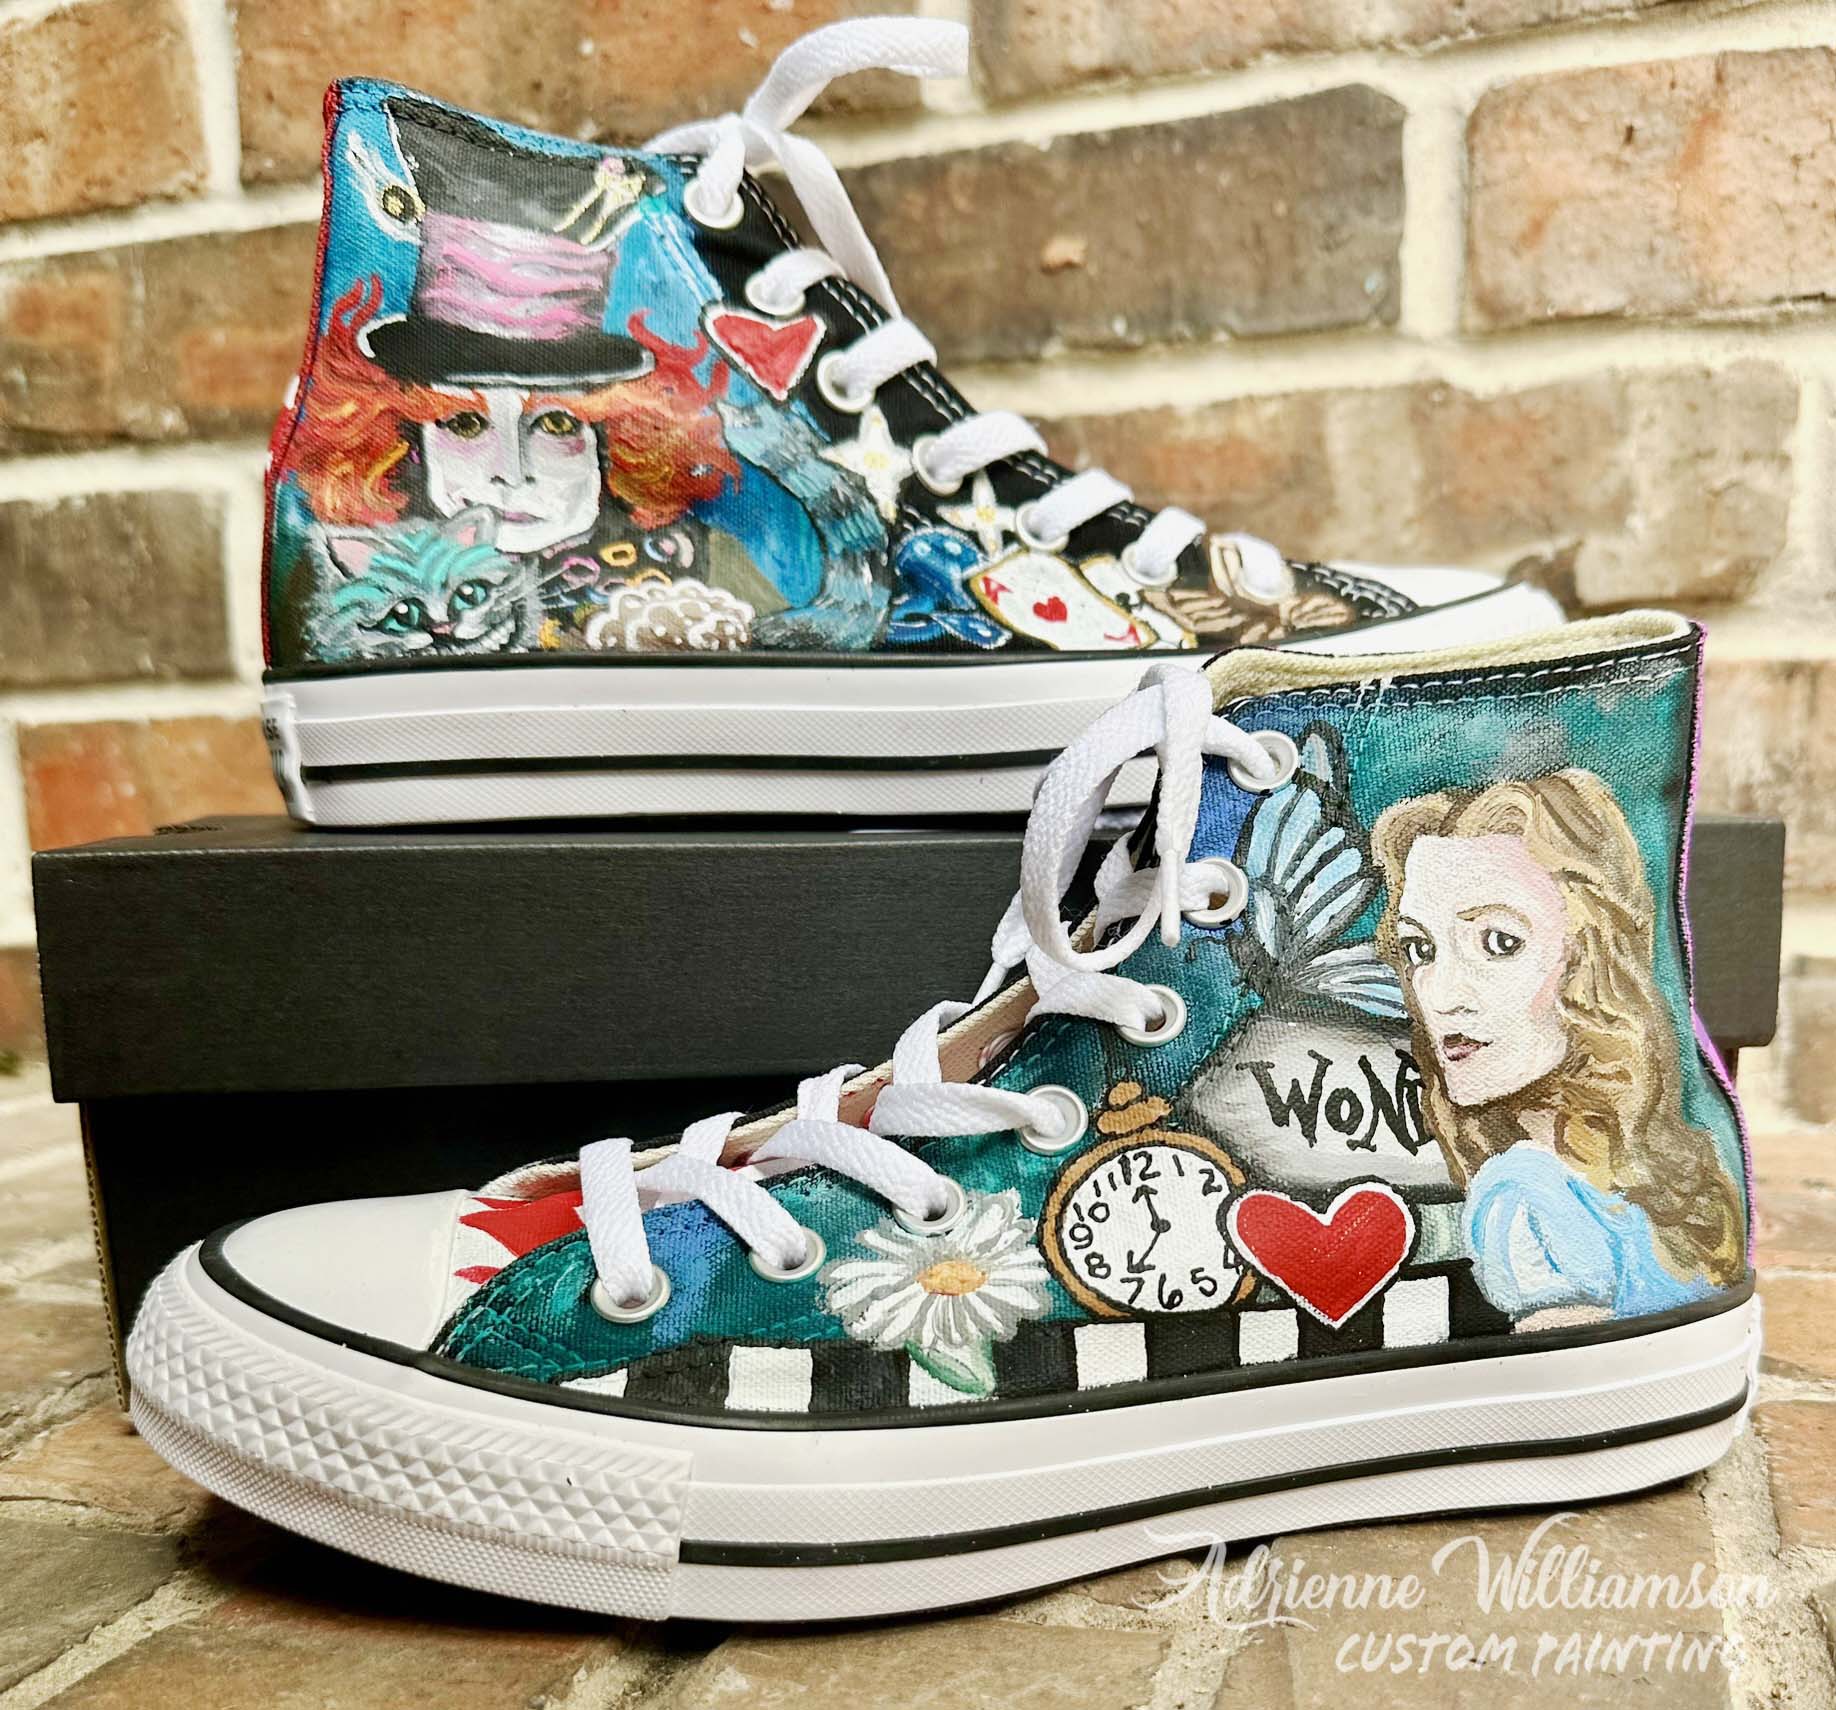 A pair of Converse painted in Alice in Wonderland Theme